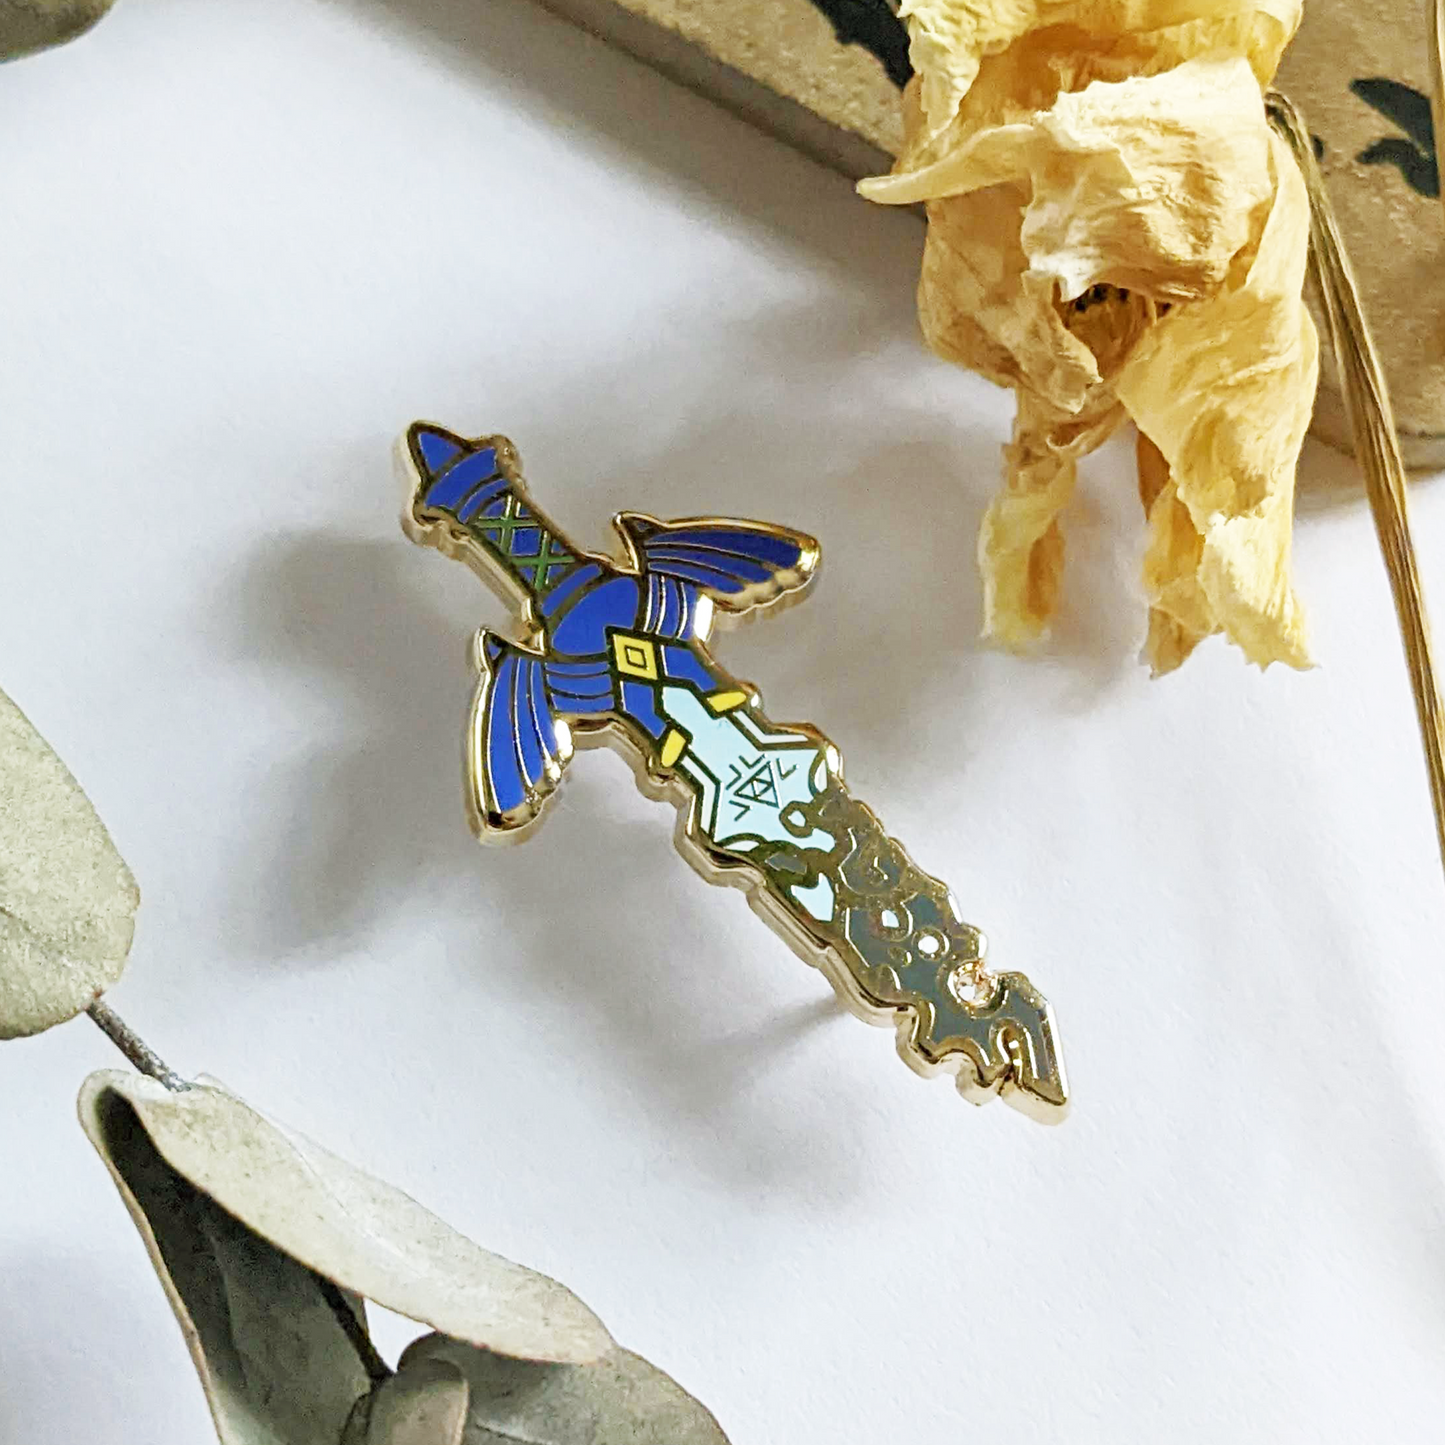 Pin - Decayed Master Sword